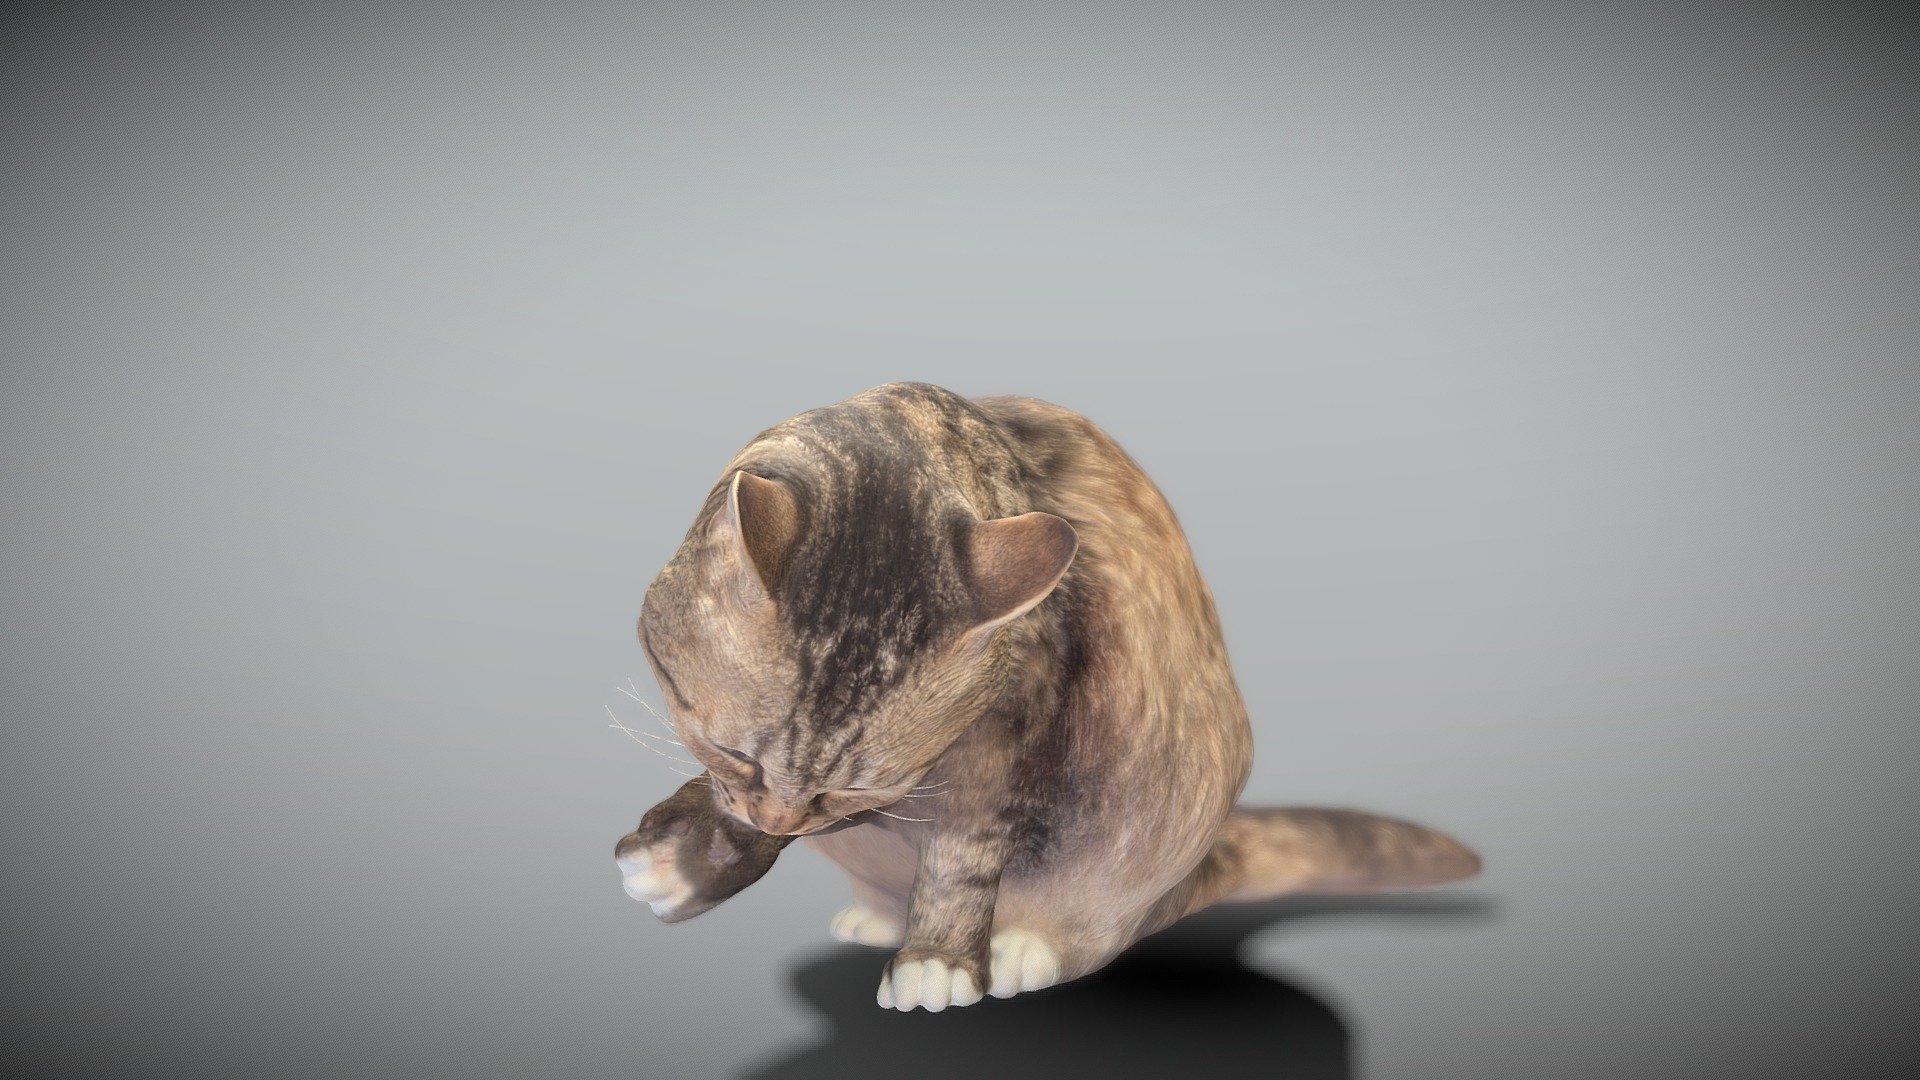 This is a true sized and highly detailed model of a young charming fluffy cat. It will add life and coziness to any architectural visualisation of houses, playgrounds, parques, urban landscapes, etc. This model is suitable for game engine integration, VR/AR content, etc.

Technical specifications:




digital double 3d scan model

150k &amp; 30k triangles | double triangulated

high-poly model (.ztl tool with 5 subdivisions) clean and retopologized automatically via ZRemesher

sufficiently clean

PBR textures 8K resolution: Diffuse, Normal, Specular maps

non-overlapping UV map

no extra plugins are required for this model

Download package includes a Cinema 4D project file with Redshift shader, OBJ, FBX, STL files, which are applicable for 3ds Max, Maya, Unreal Engine, Unity, Blender, etc. All the textures you will find in the “Tex” folder, included into the main archive.

3D EVERYTHING

Stand with Ukraine! - Fluffy cat licking itself 34 - Buy Royalty Free 3D model by deep3dstudio 3d model